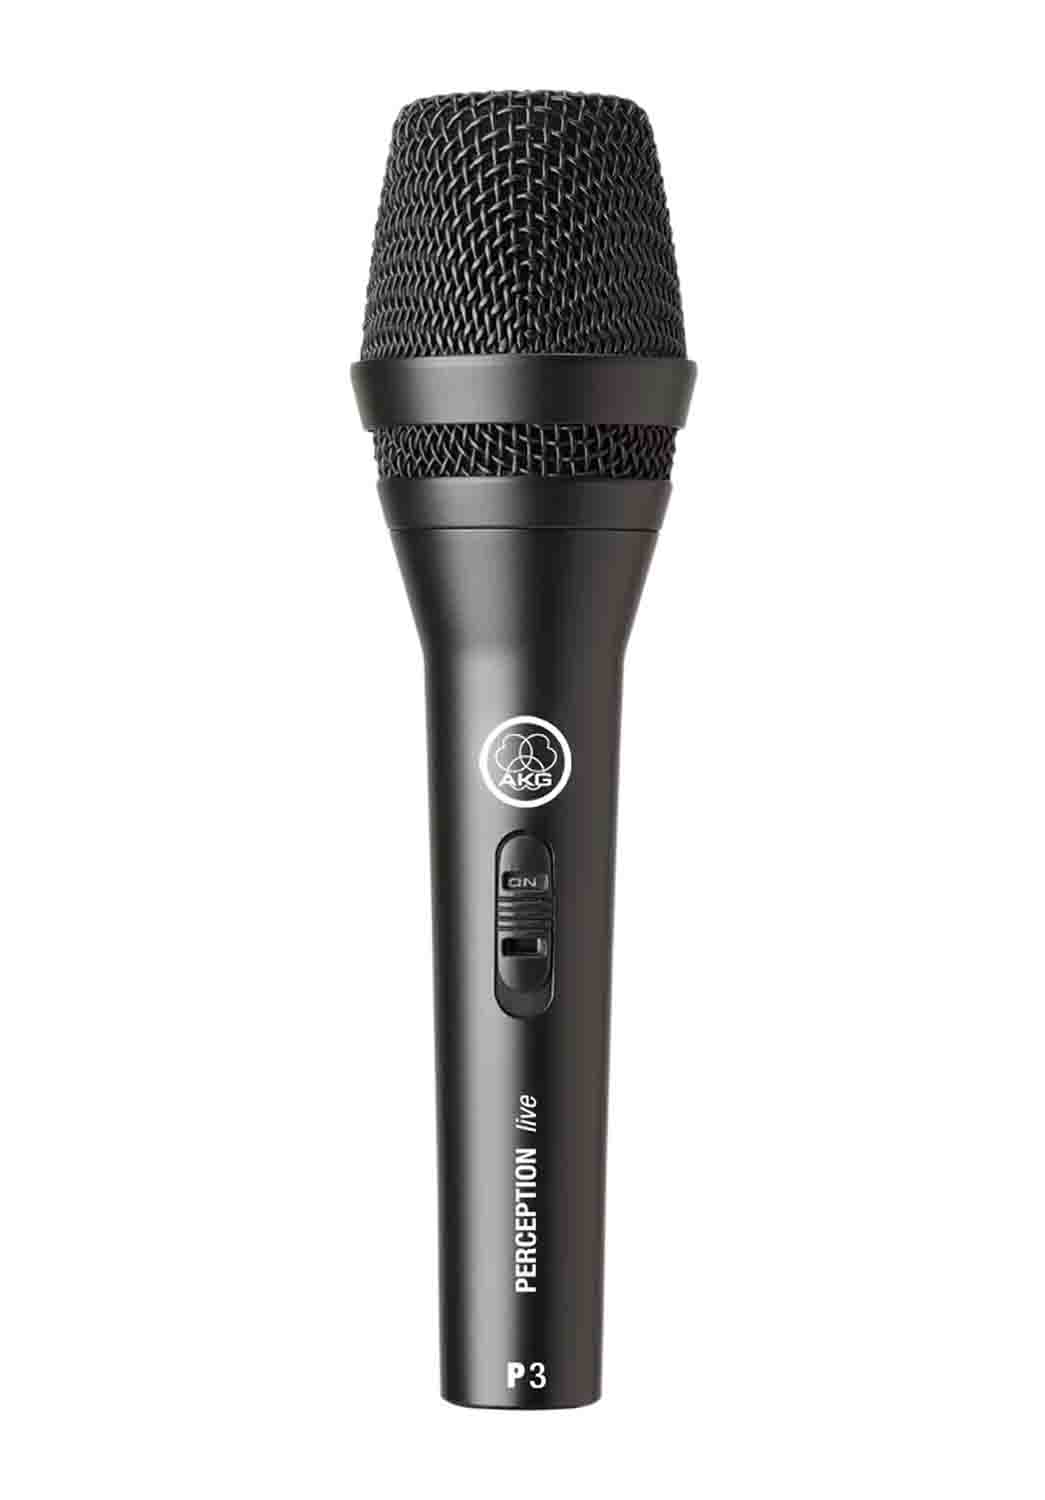 AKG P3 S High-Performance Dynamic Microphone with On and Off Switch by AKG